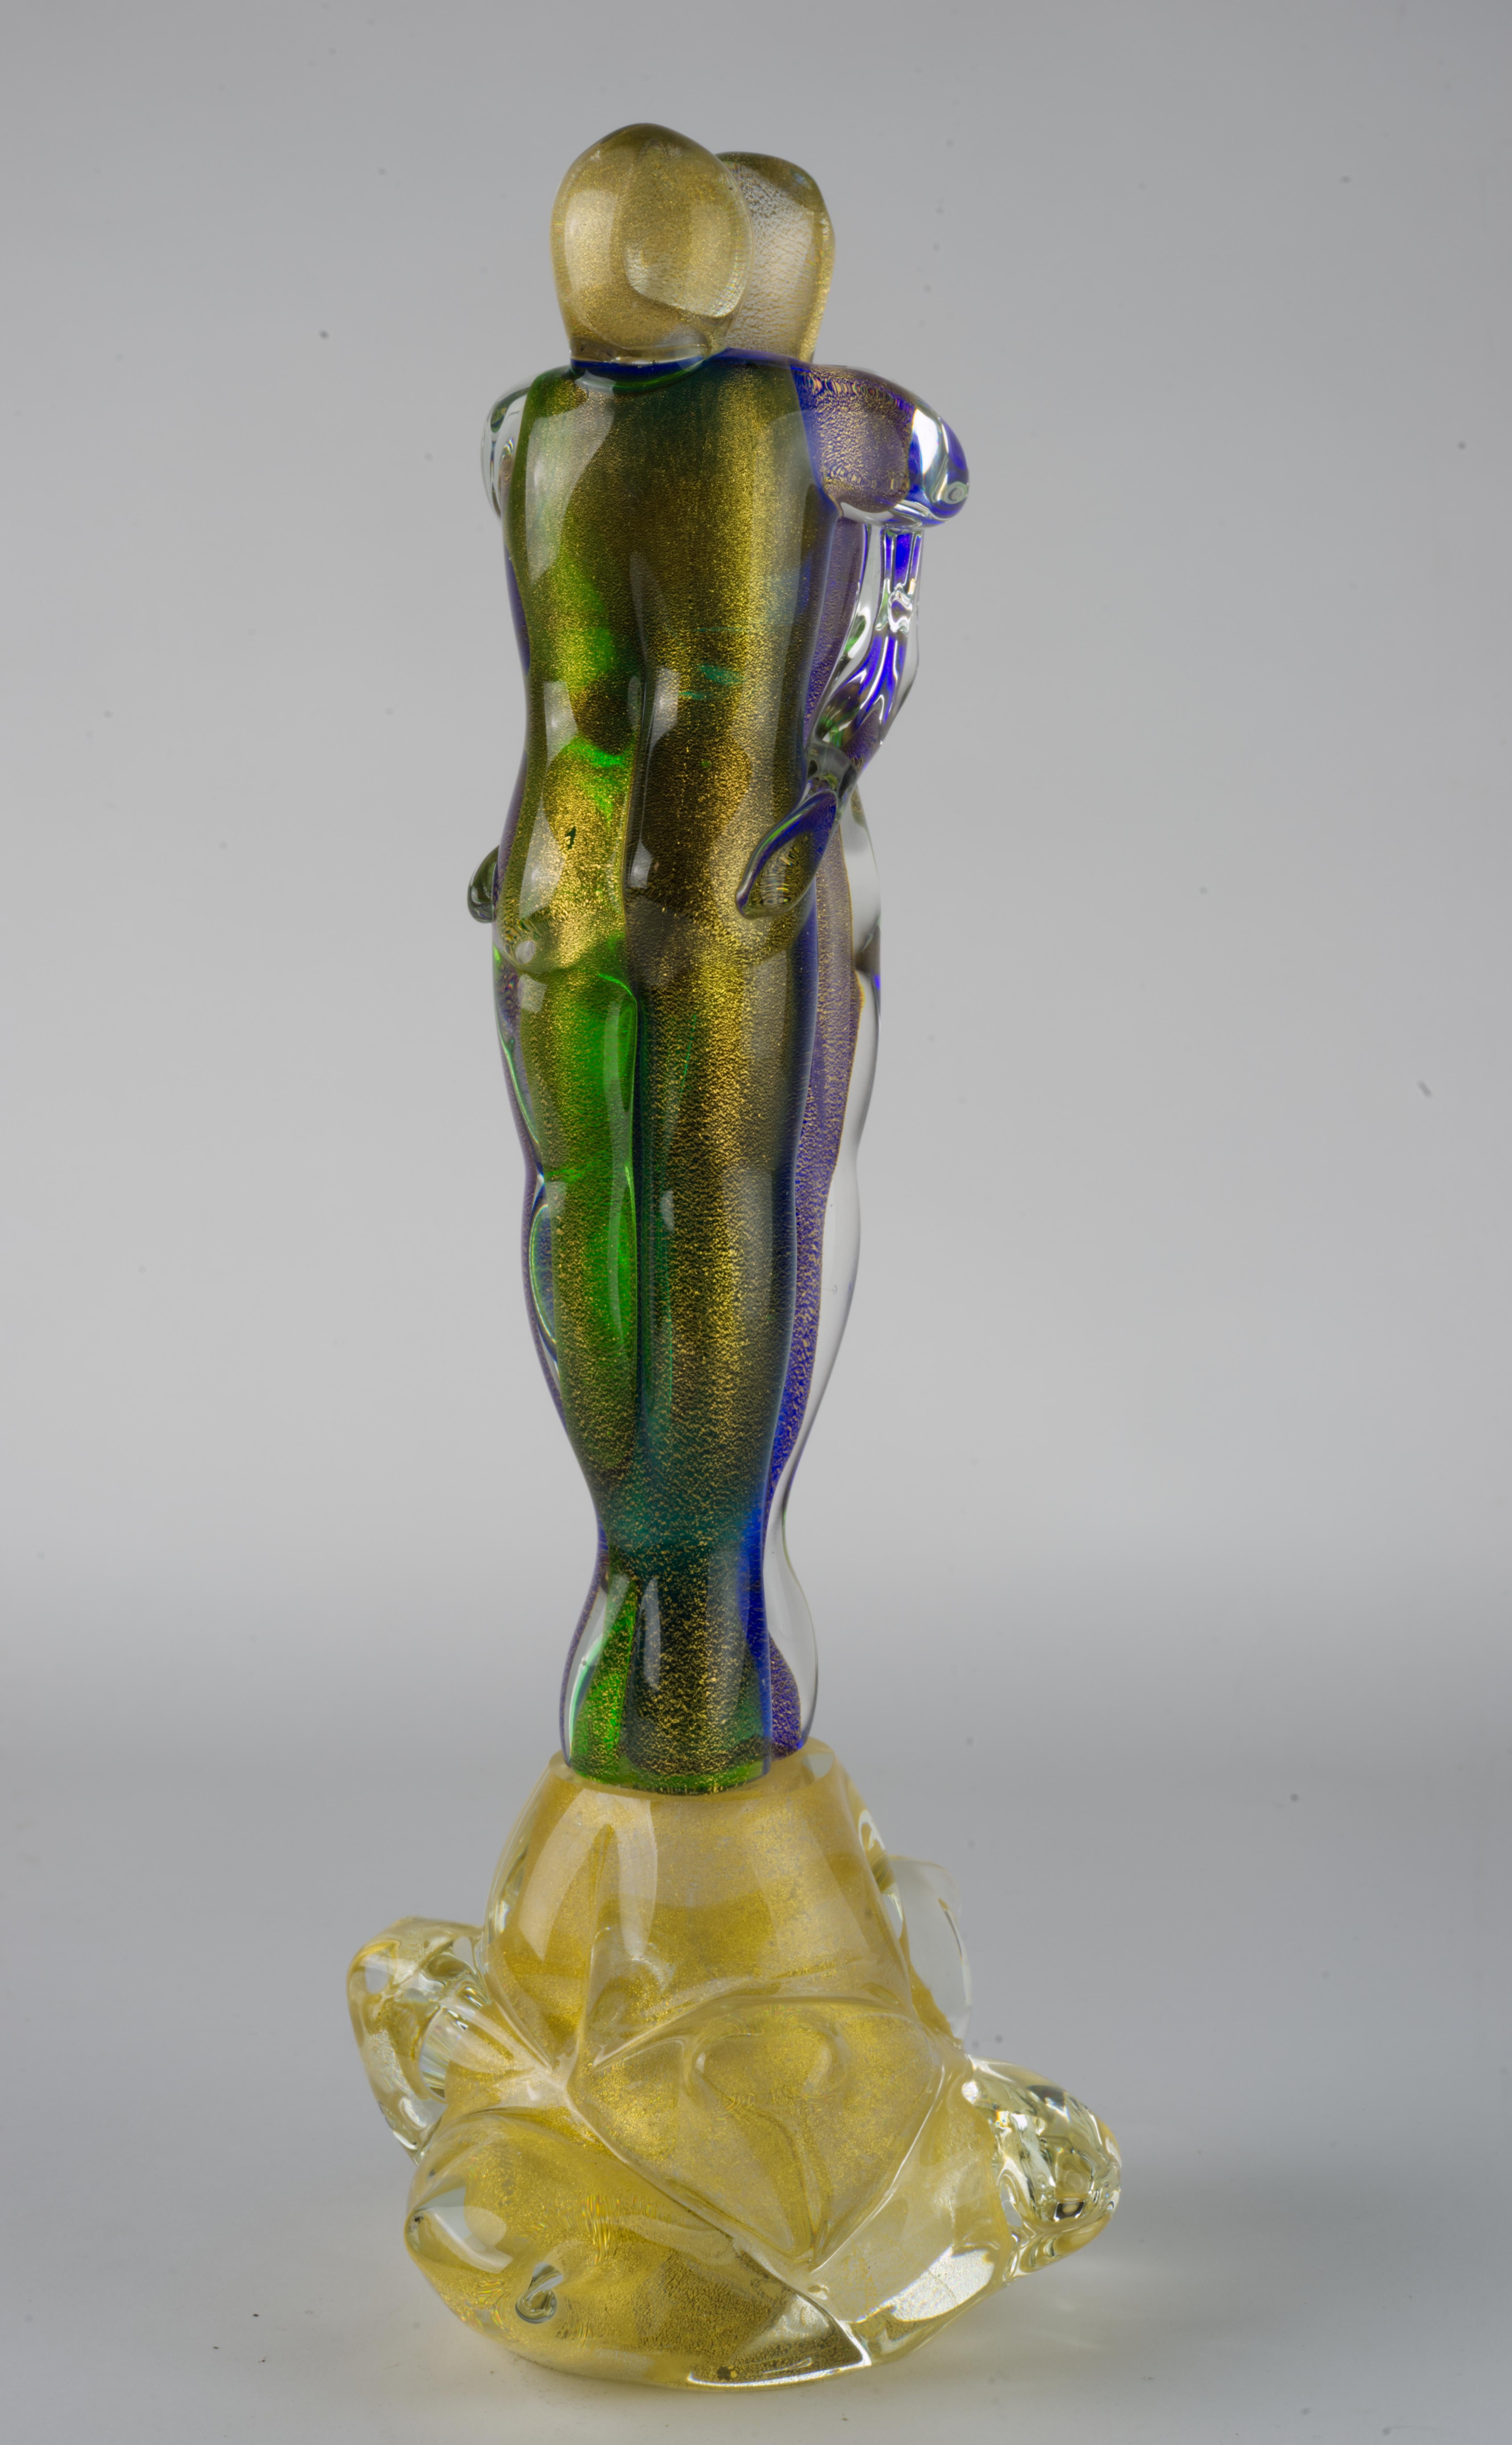 Lovers Murano Art Glass Abstract Sculpture by Sandro Frattin, Signed In Good Condition For Sale In Clifton Springs, NY